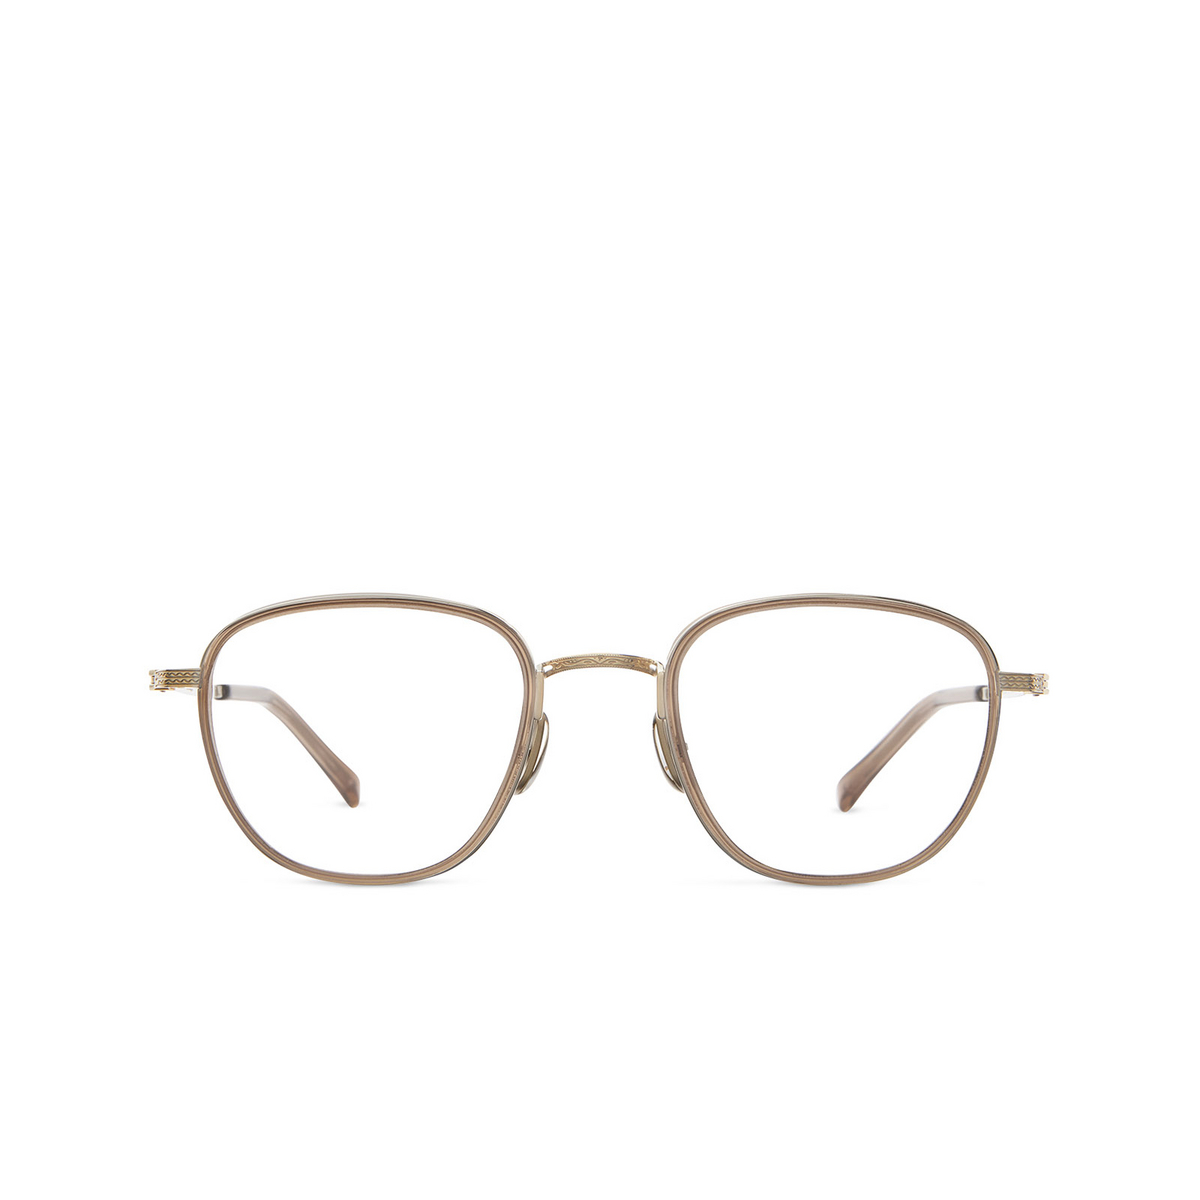 Mr. Leight GRIFFITH II C Eyeglasses TOP-12KG Topaz-12K White Gold - front view